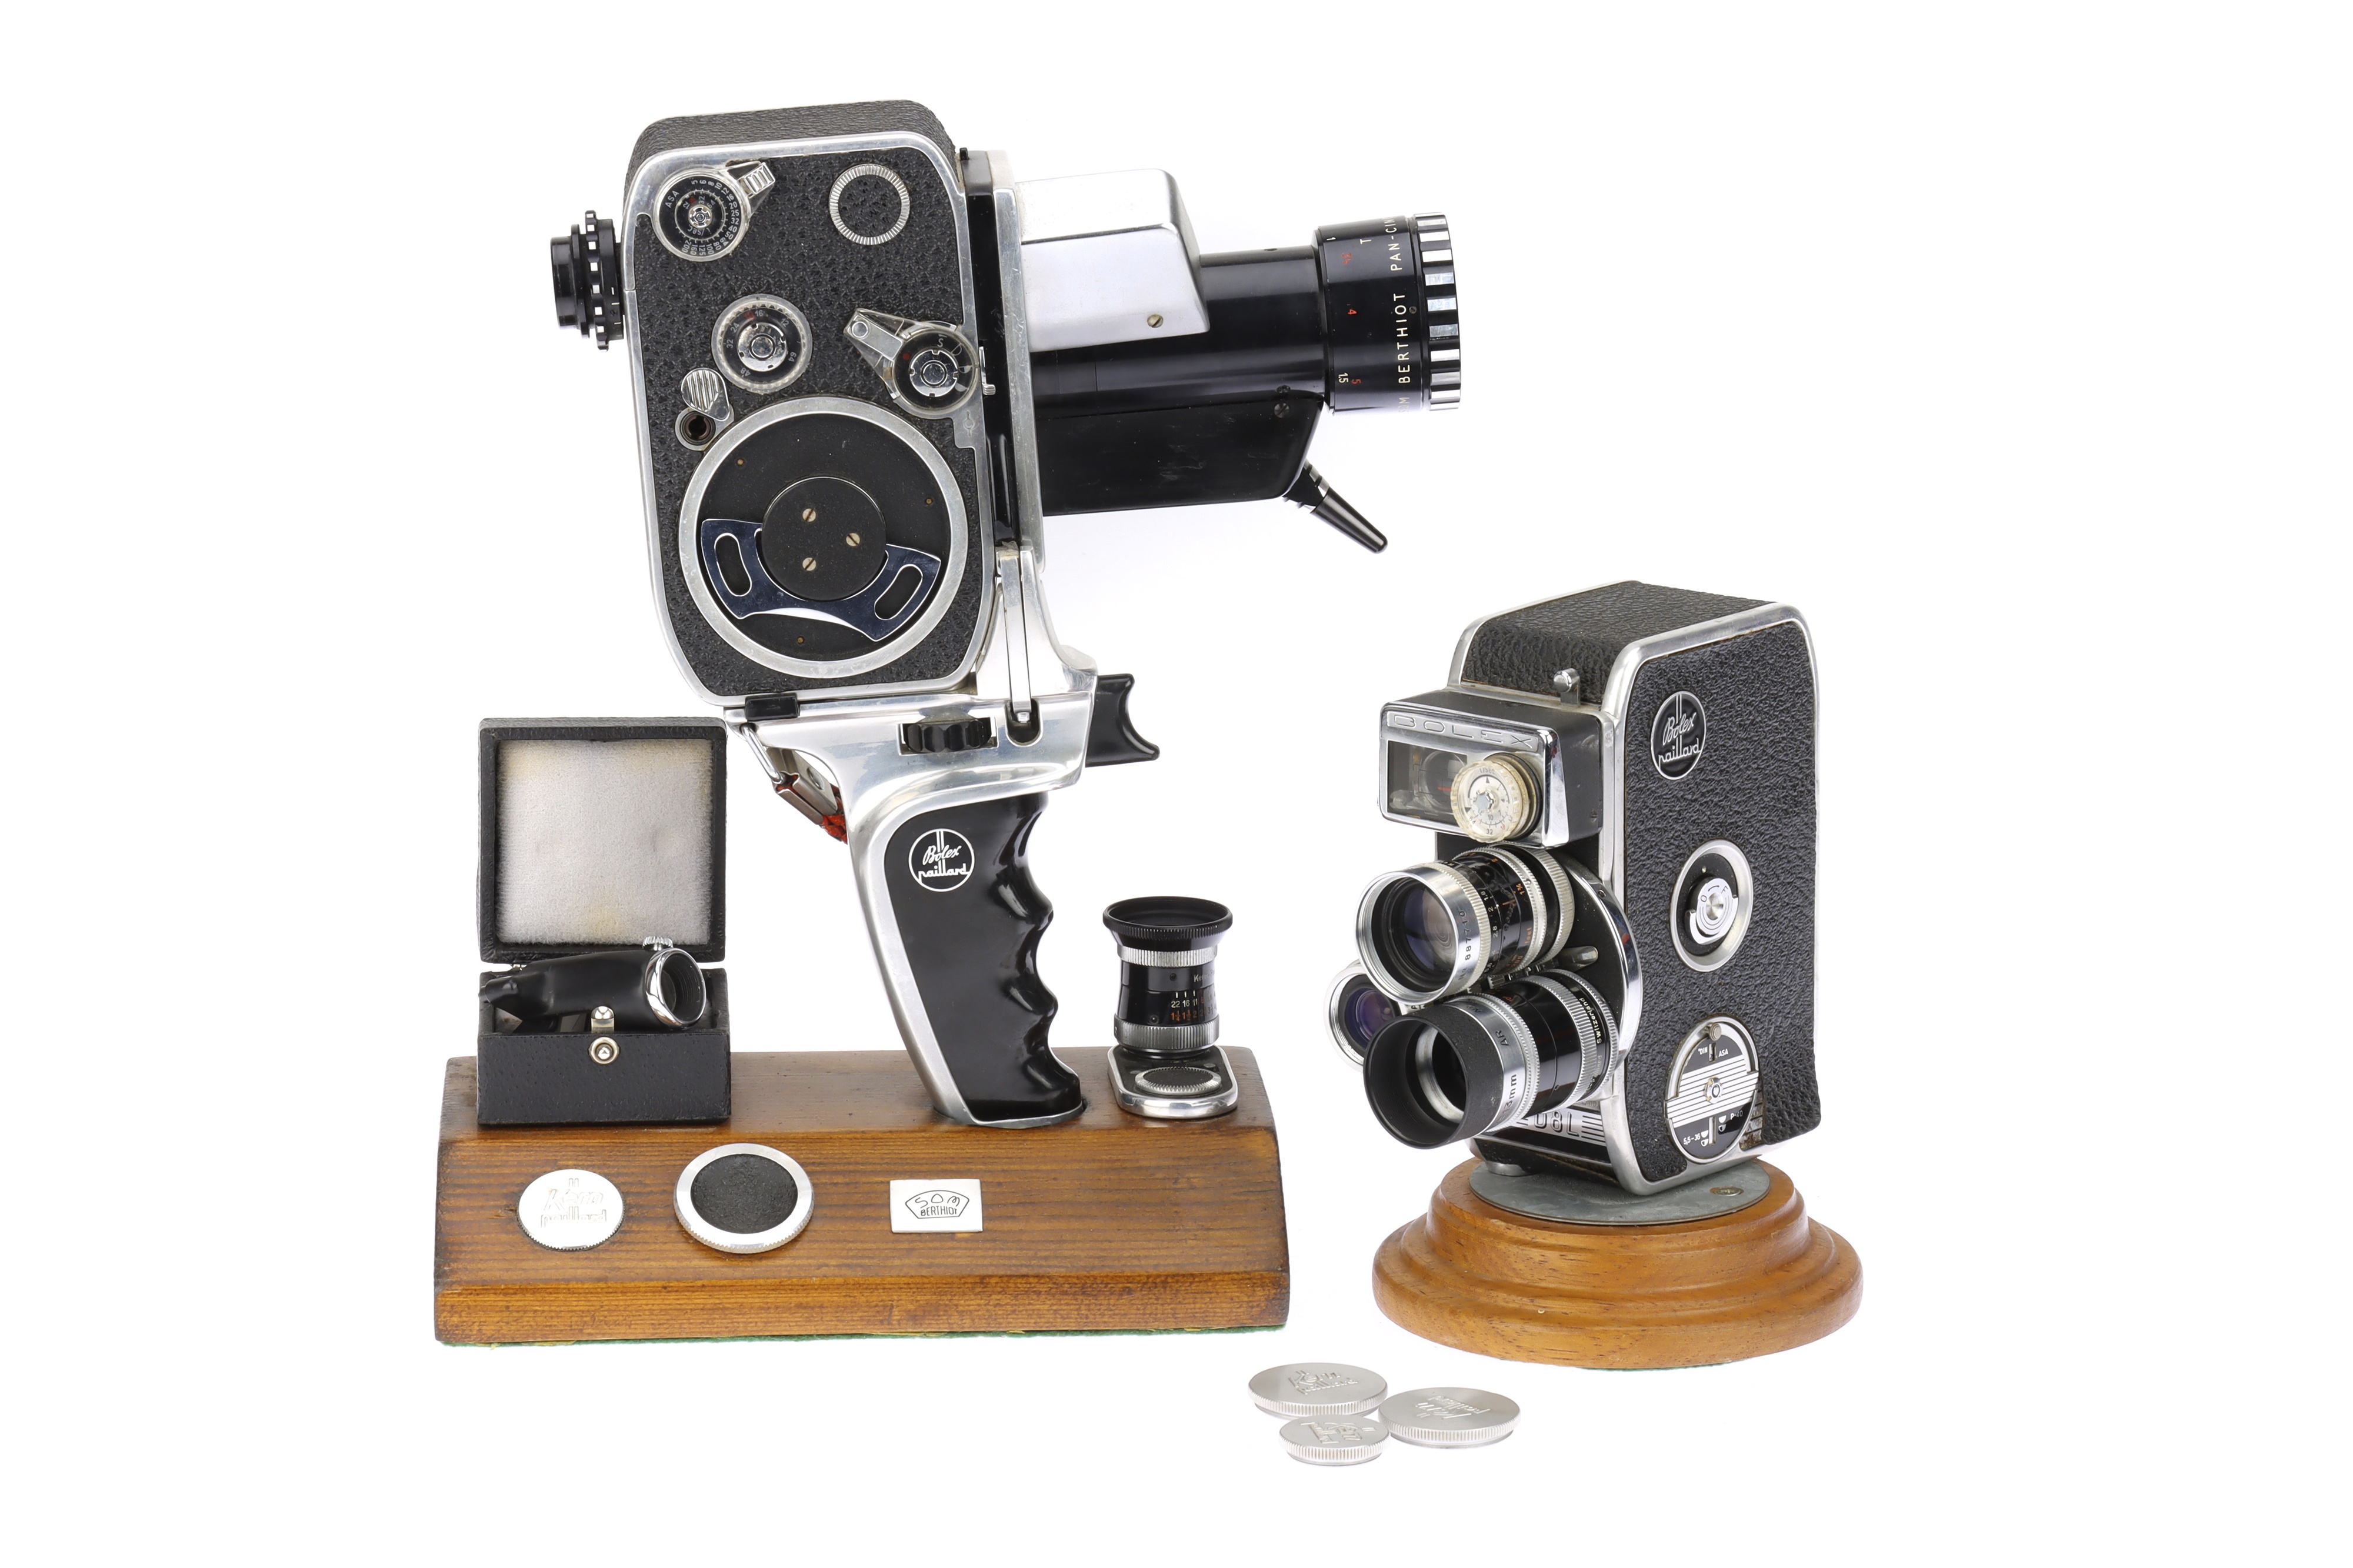 Two Paillard Bolex Double 8mm Motion Picture Cameras in Display Mounts,